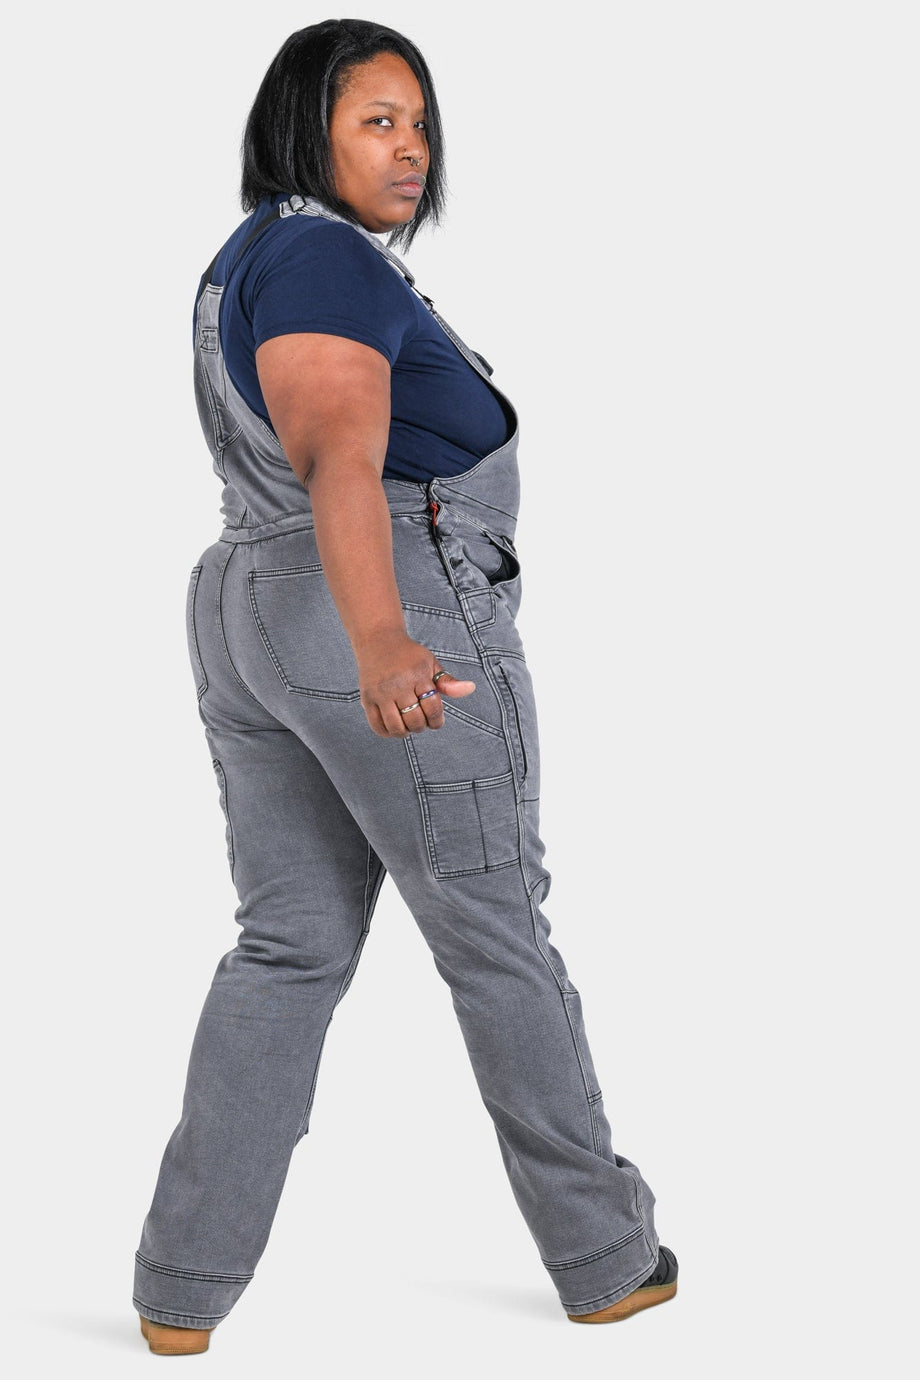 Freshley Drop Seat Overalls in Grey Stretch Thermal Denim